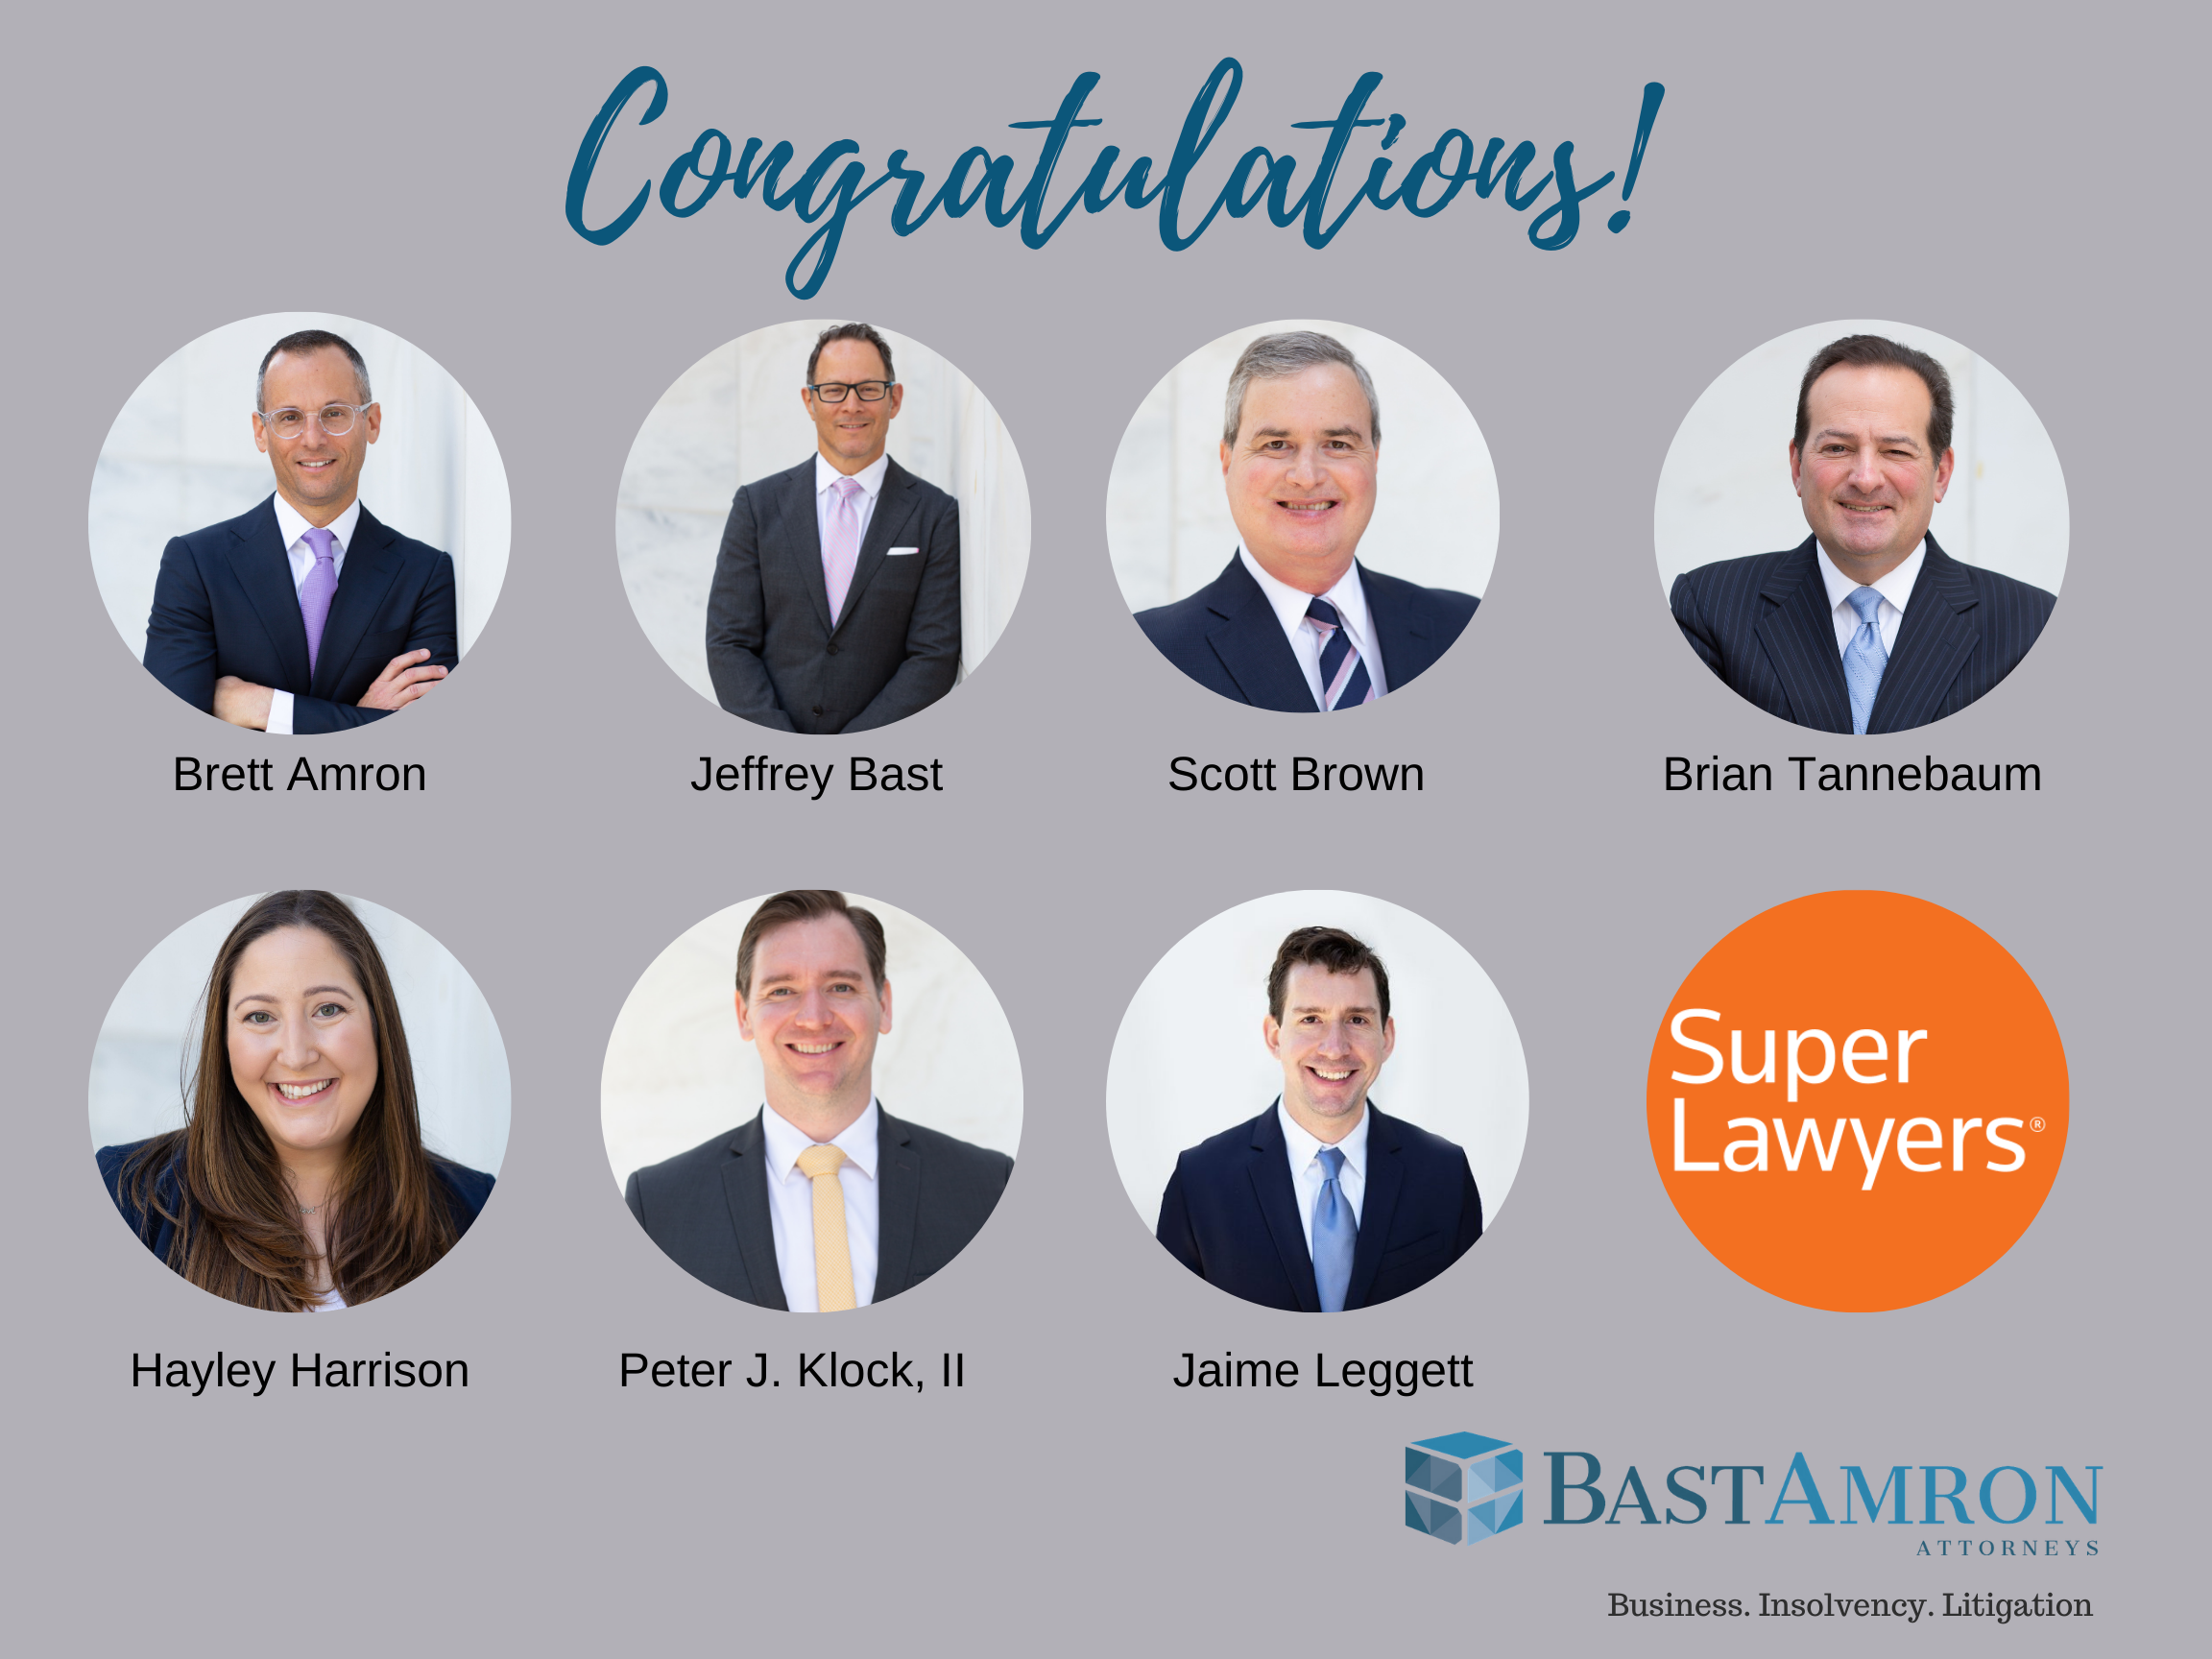 BAST AMRON ATTORNEYS RECOGNIZED IN 2021 EDITION OF FLORIDA SUPER LAWYERS